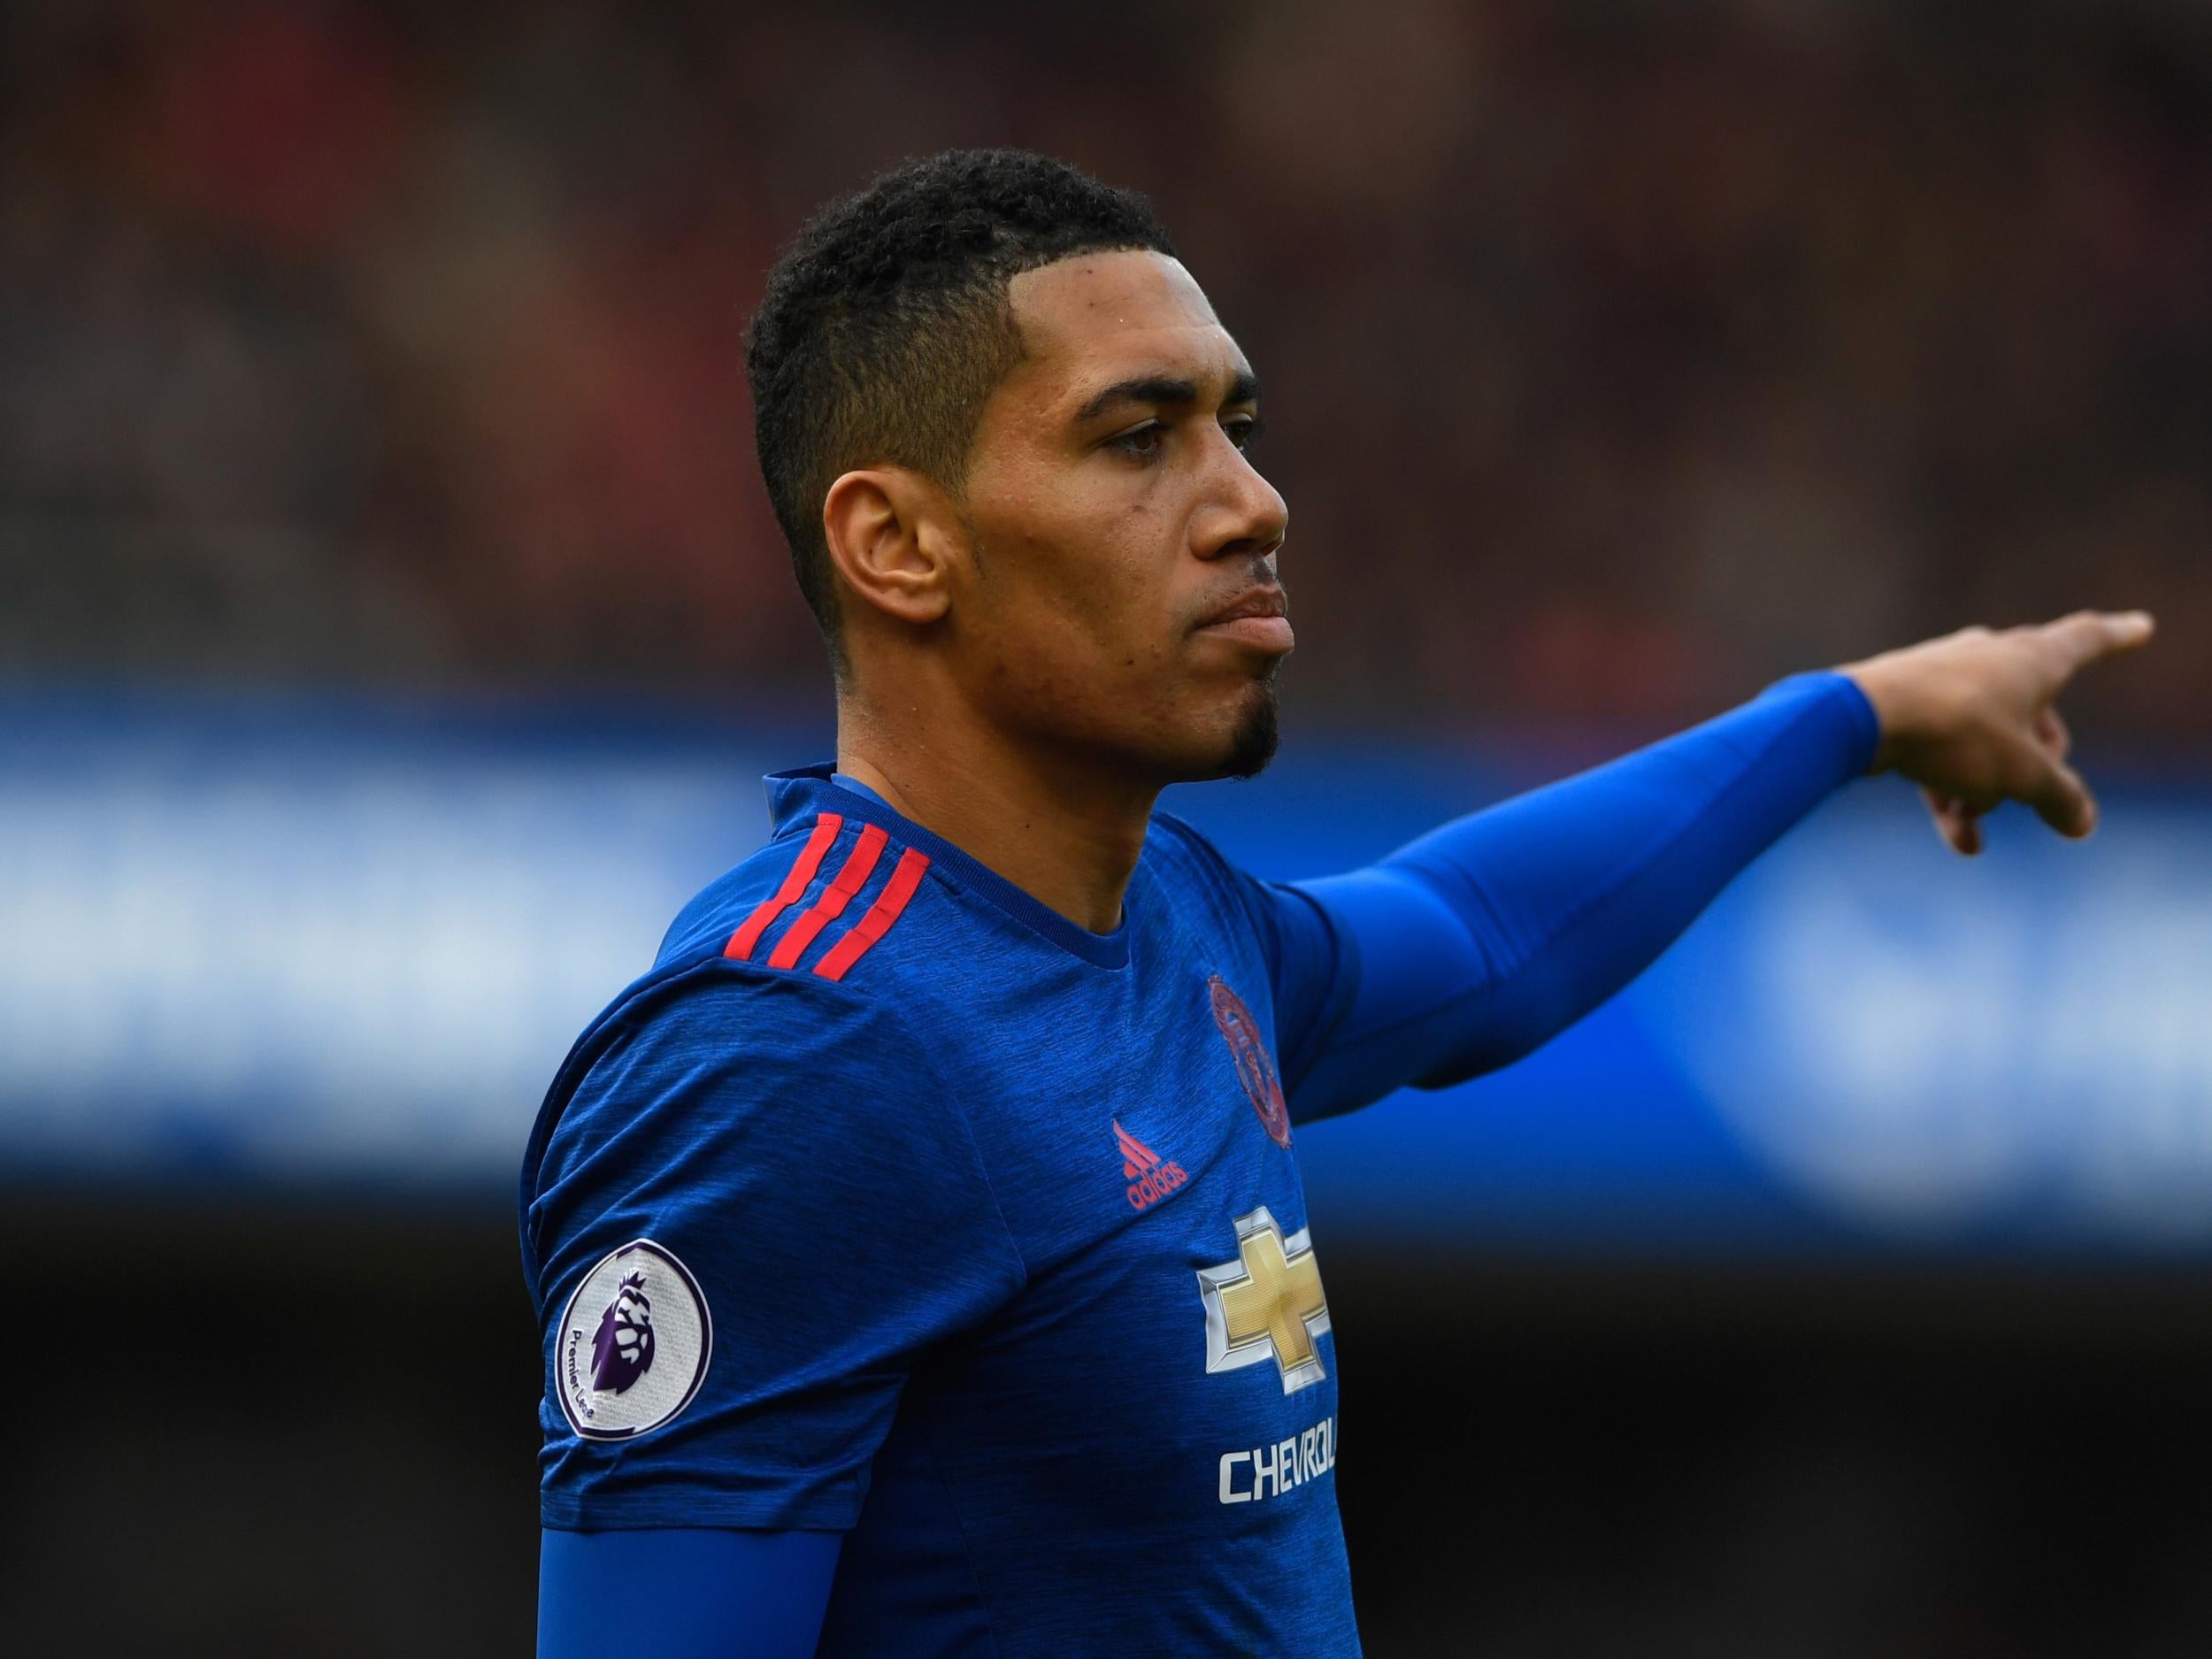 Chris Smalling suffered two major injuries this season